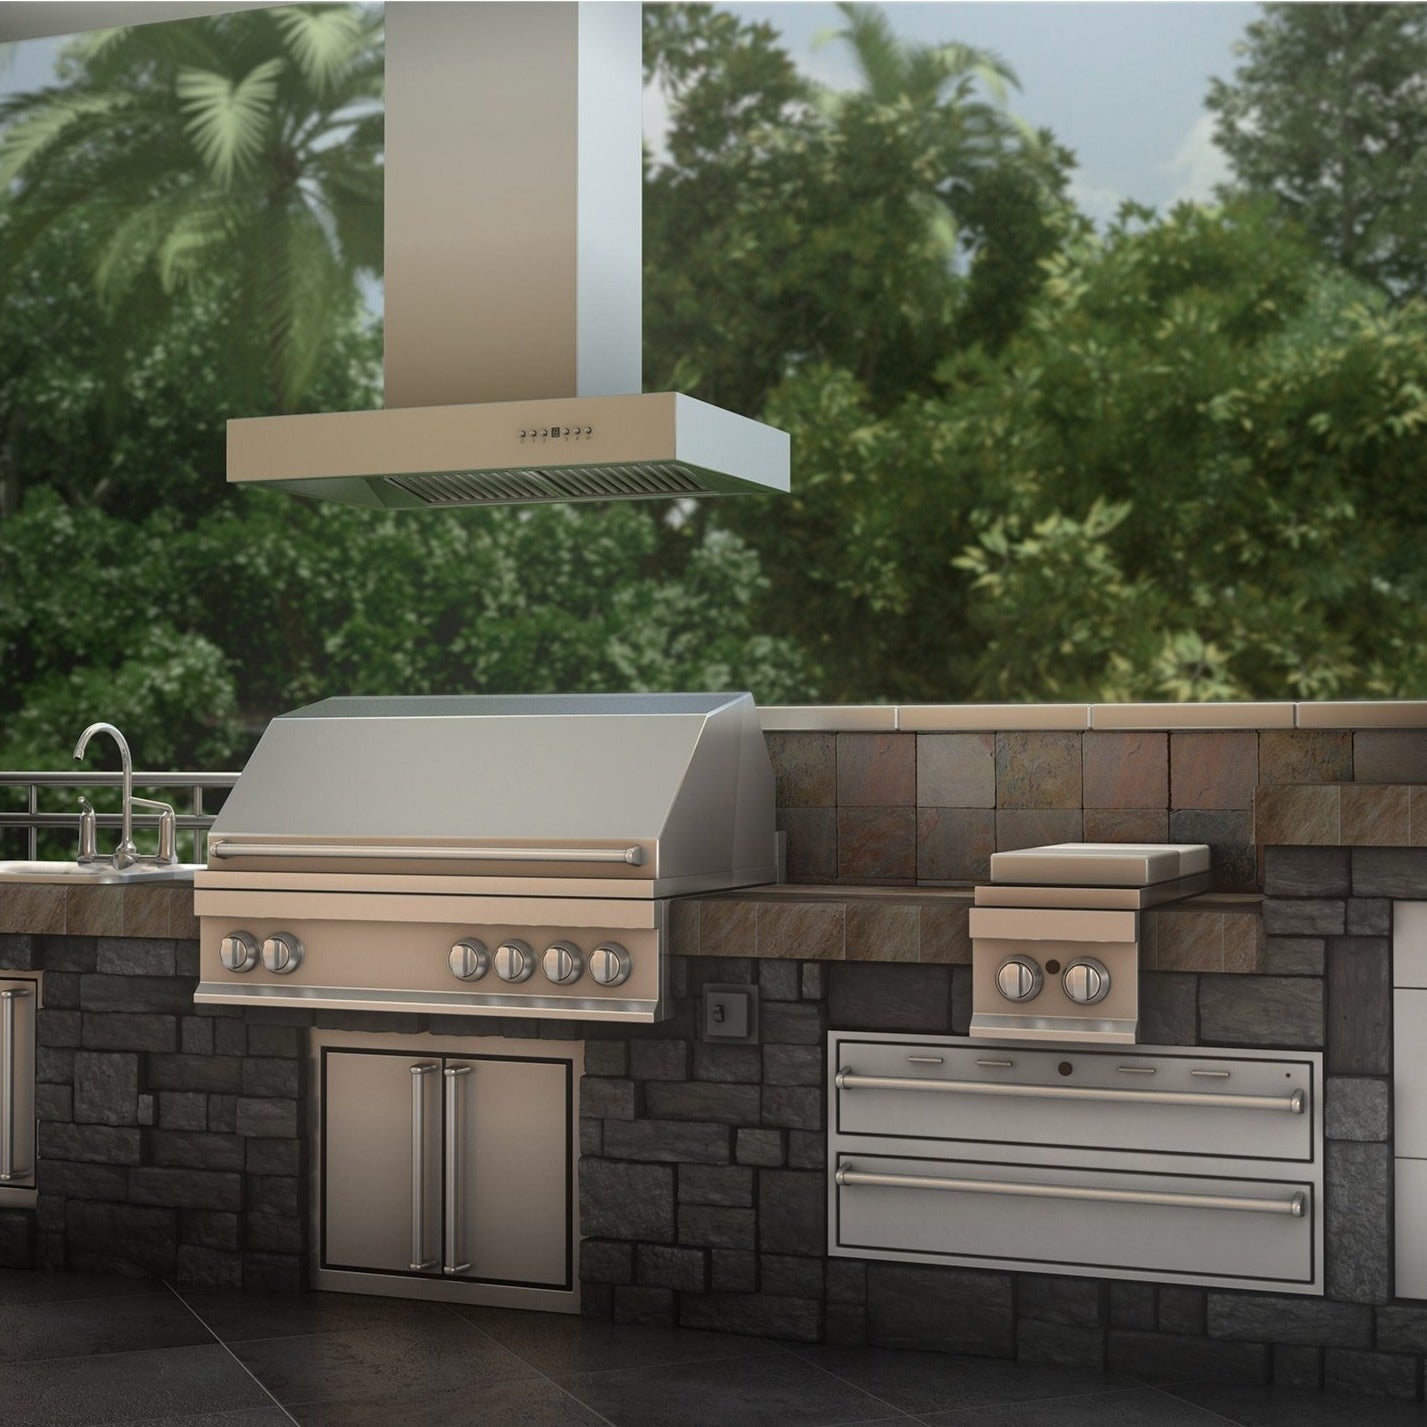 ZLINE Ducted Outdoor Island Mount Range Hood in Stainless Steel (KECOMi-304) rendering outside above barbecue in a stone patio kitchen.